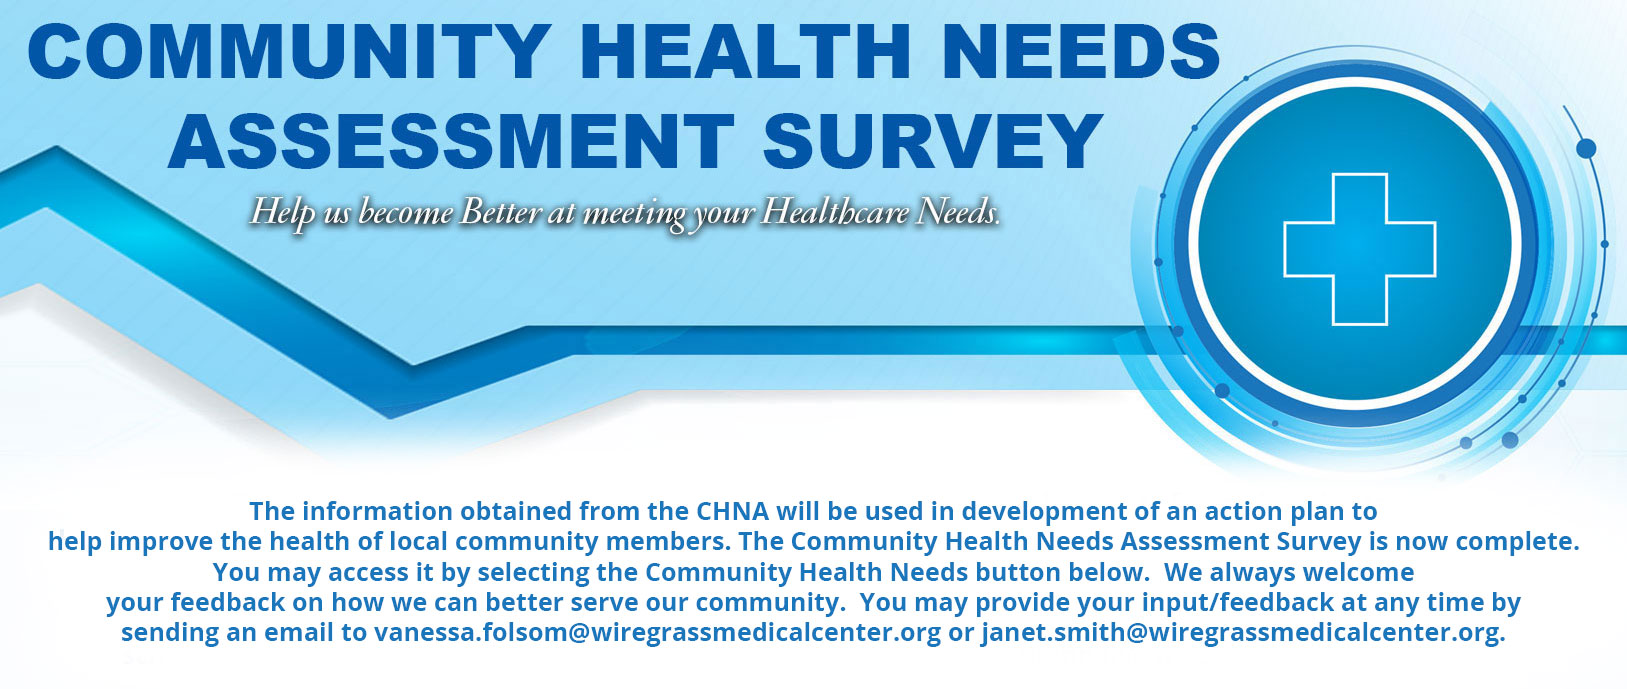 Banner that says: 
COMMUNITY HEALTH NEEDS ASSESSMENT SURVEY
Help us become Better at meeting your Healthcare Needs.

The information obtained from the CHNA will be used in the development of an action plan to help improve the health of local community members. The Community Health Needs Assessment Survey is now complete.  You may access it by selecting the Community Health Needs button below.  We always welcome your feedback on how we can better serve our community. You may provide your input/feedback at any time by sending an email to vanessa.folsom@wiregrassmedicalcenter.org or janet.smith@wiregrassmedicalcenter.org.